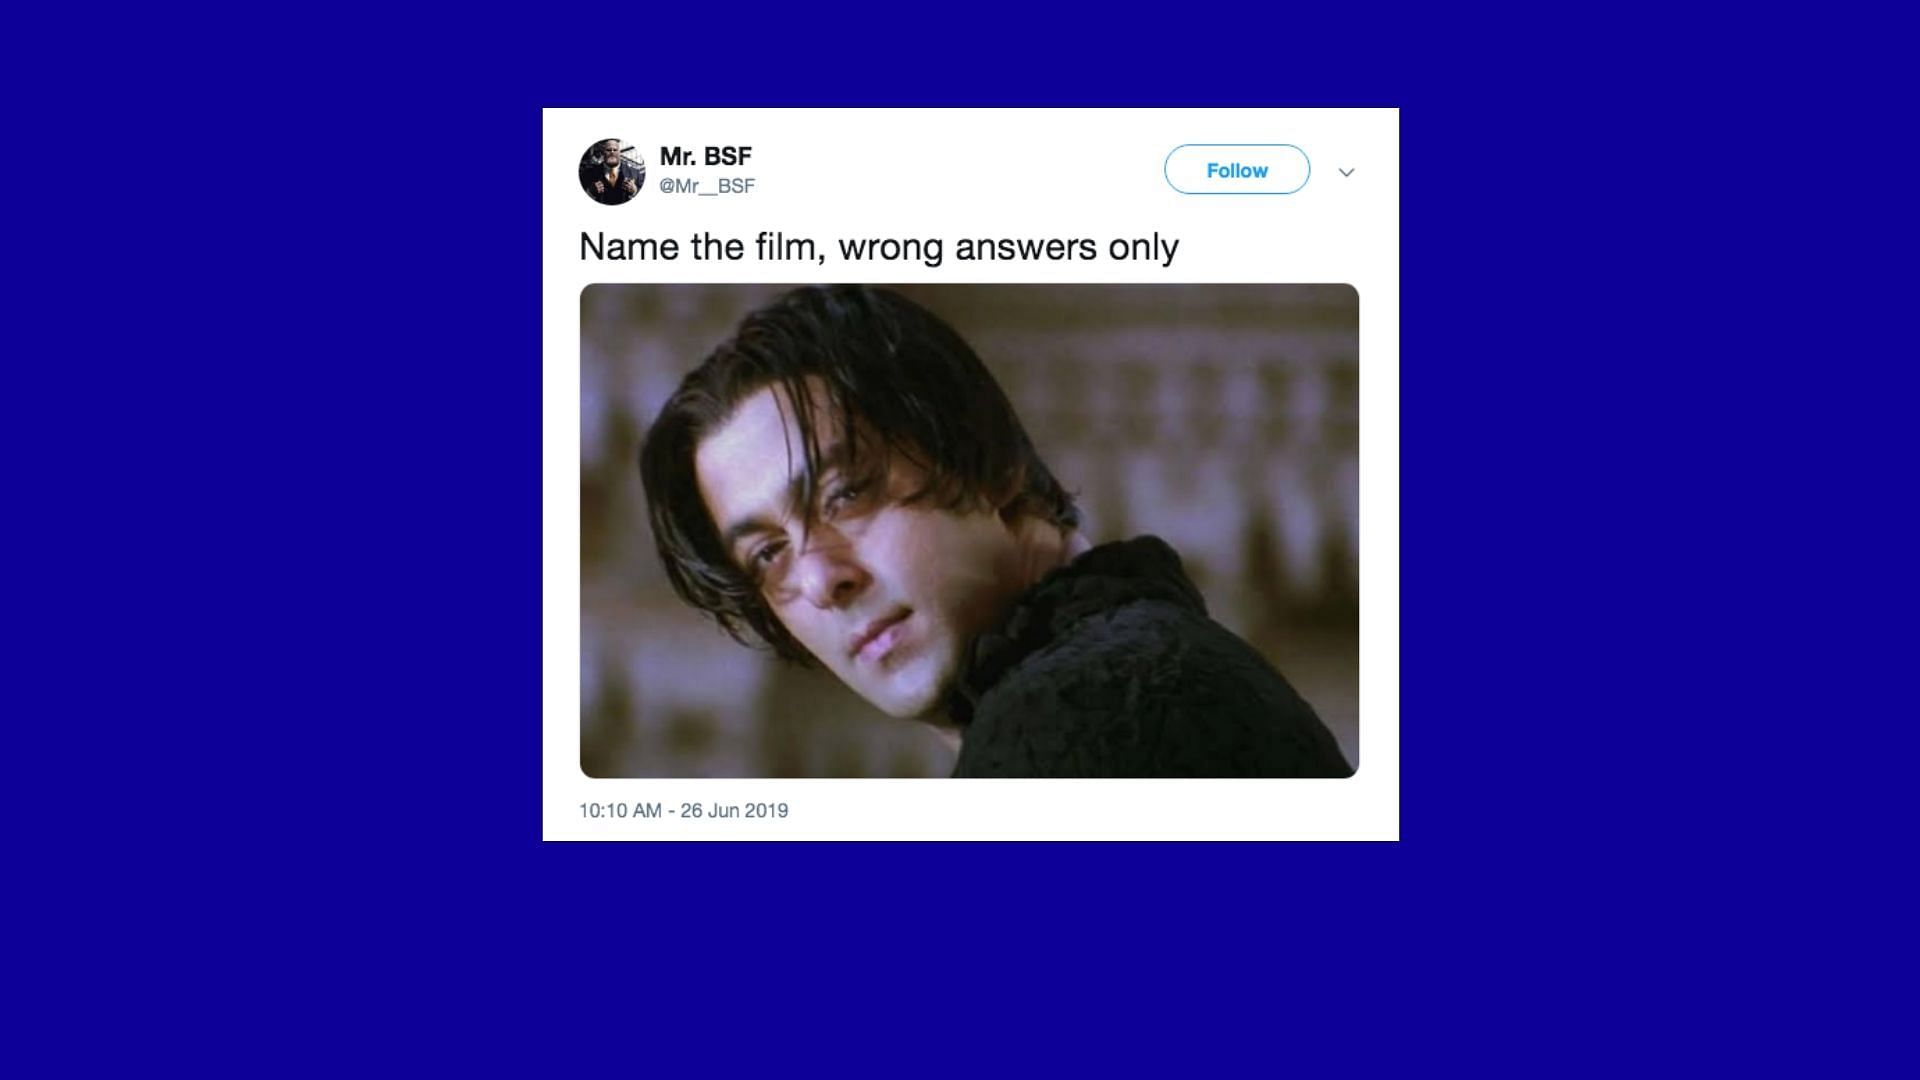 ‘Name the film, wrong answers only’ meme goes viral on social media once again.